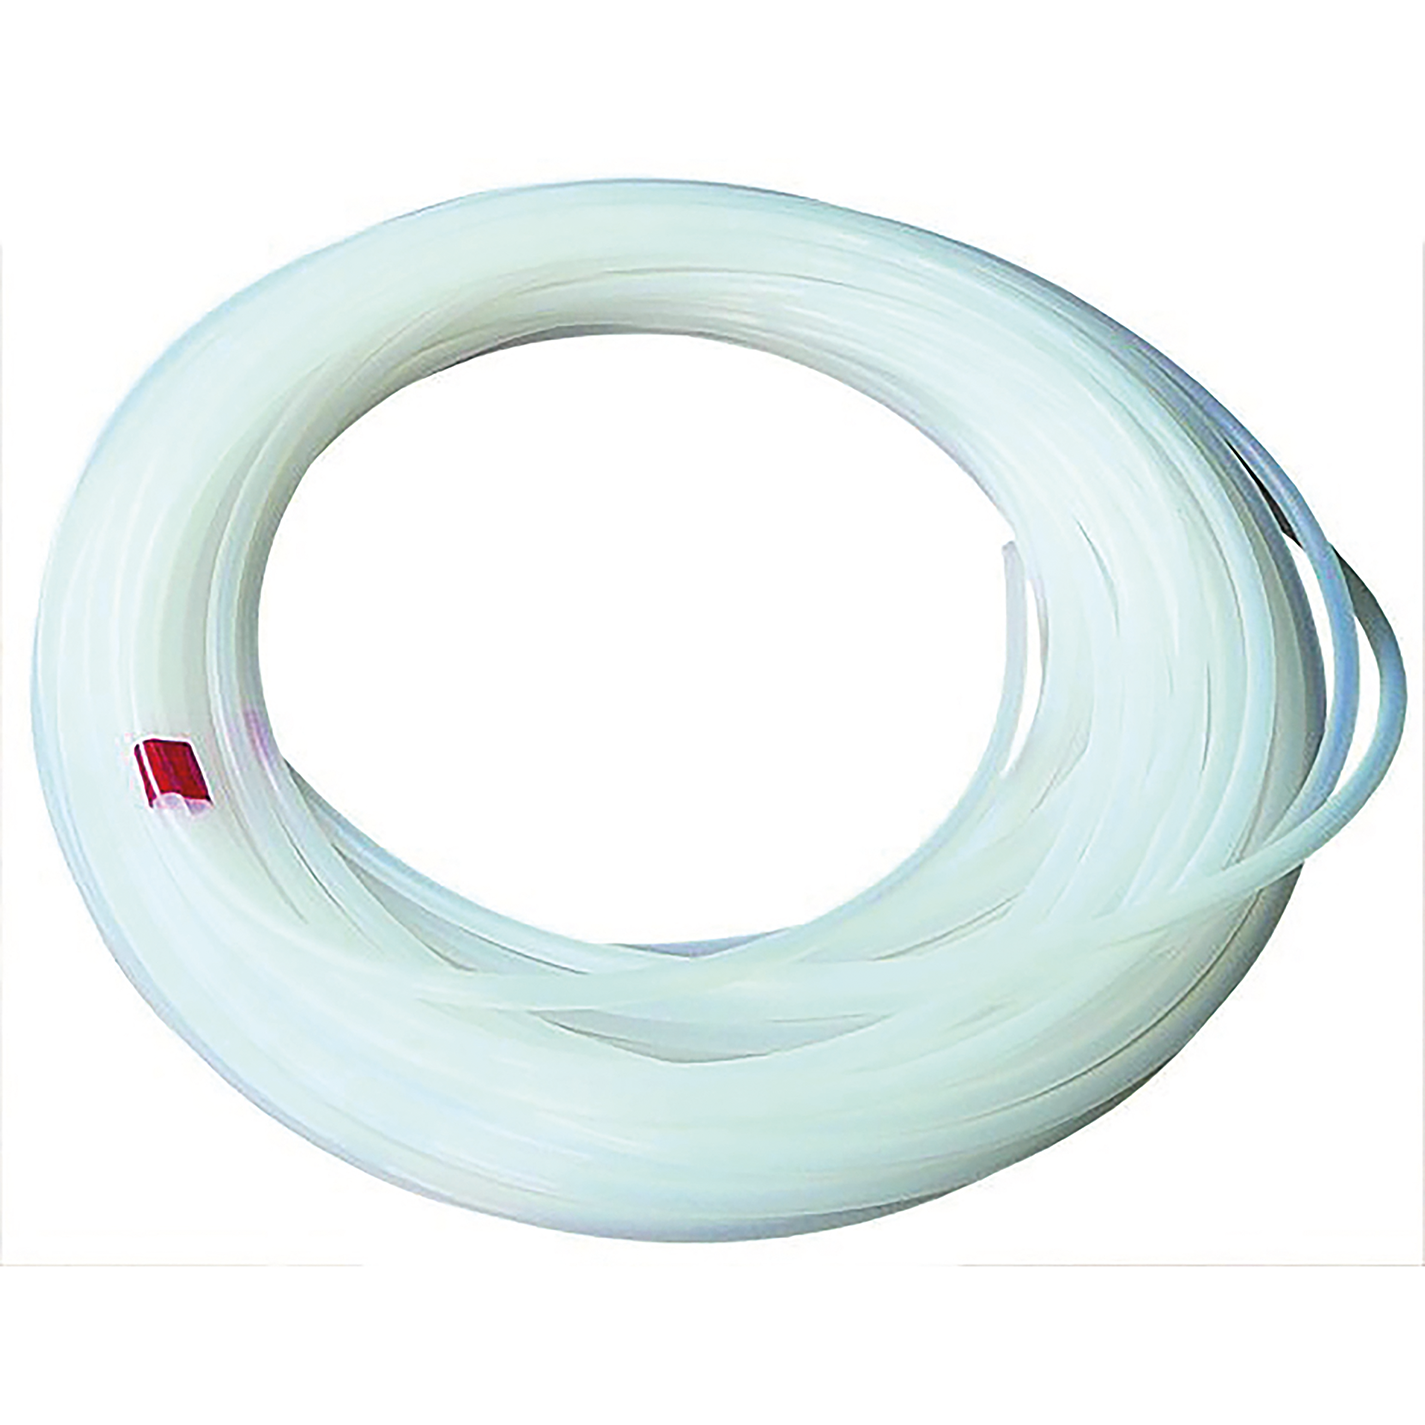 8mm ID x 10mm OD Flexible Low Friction Tube